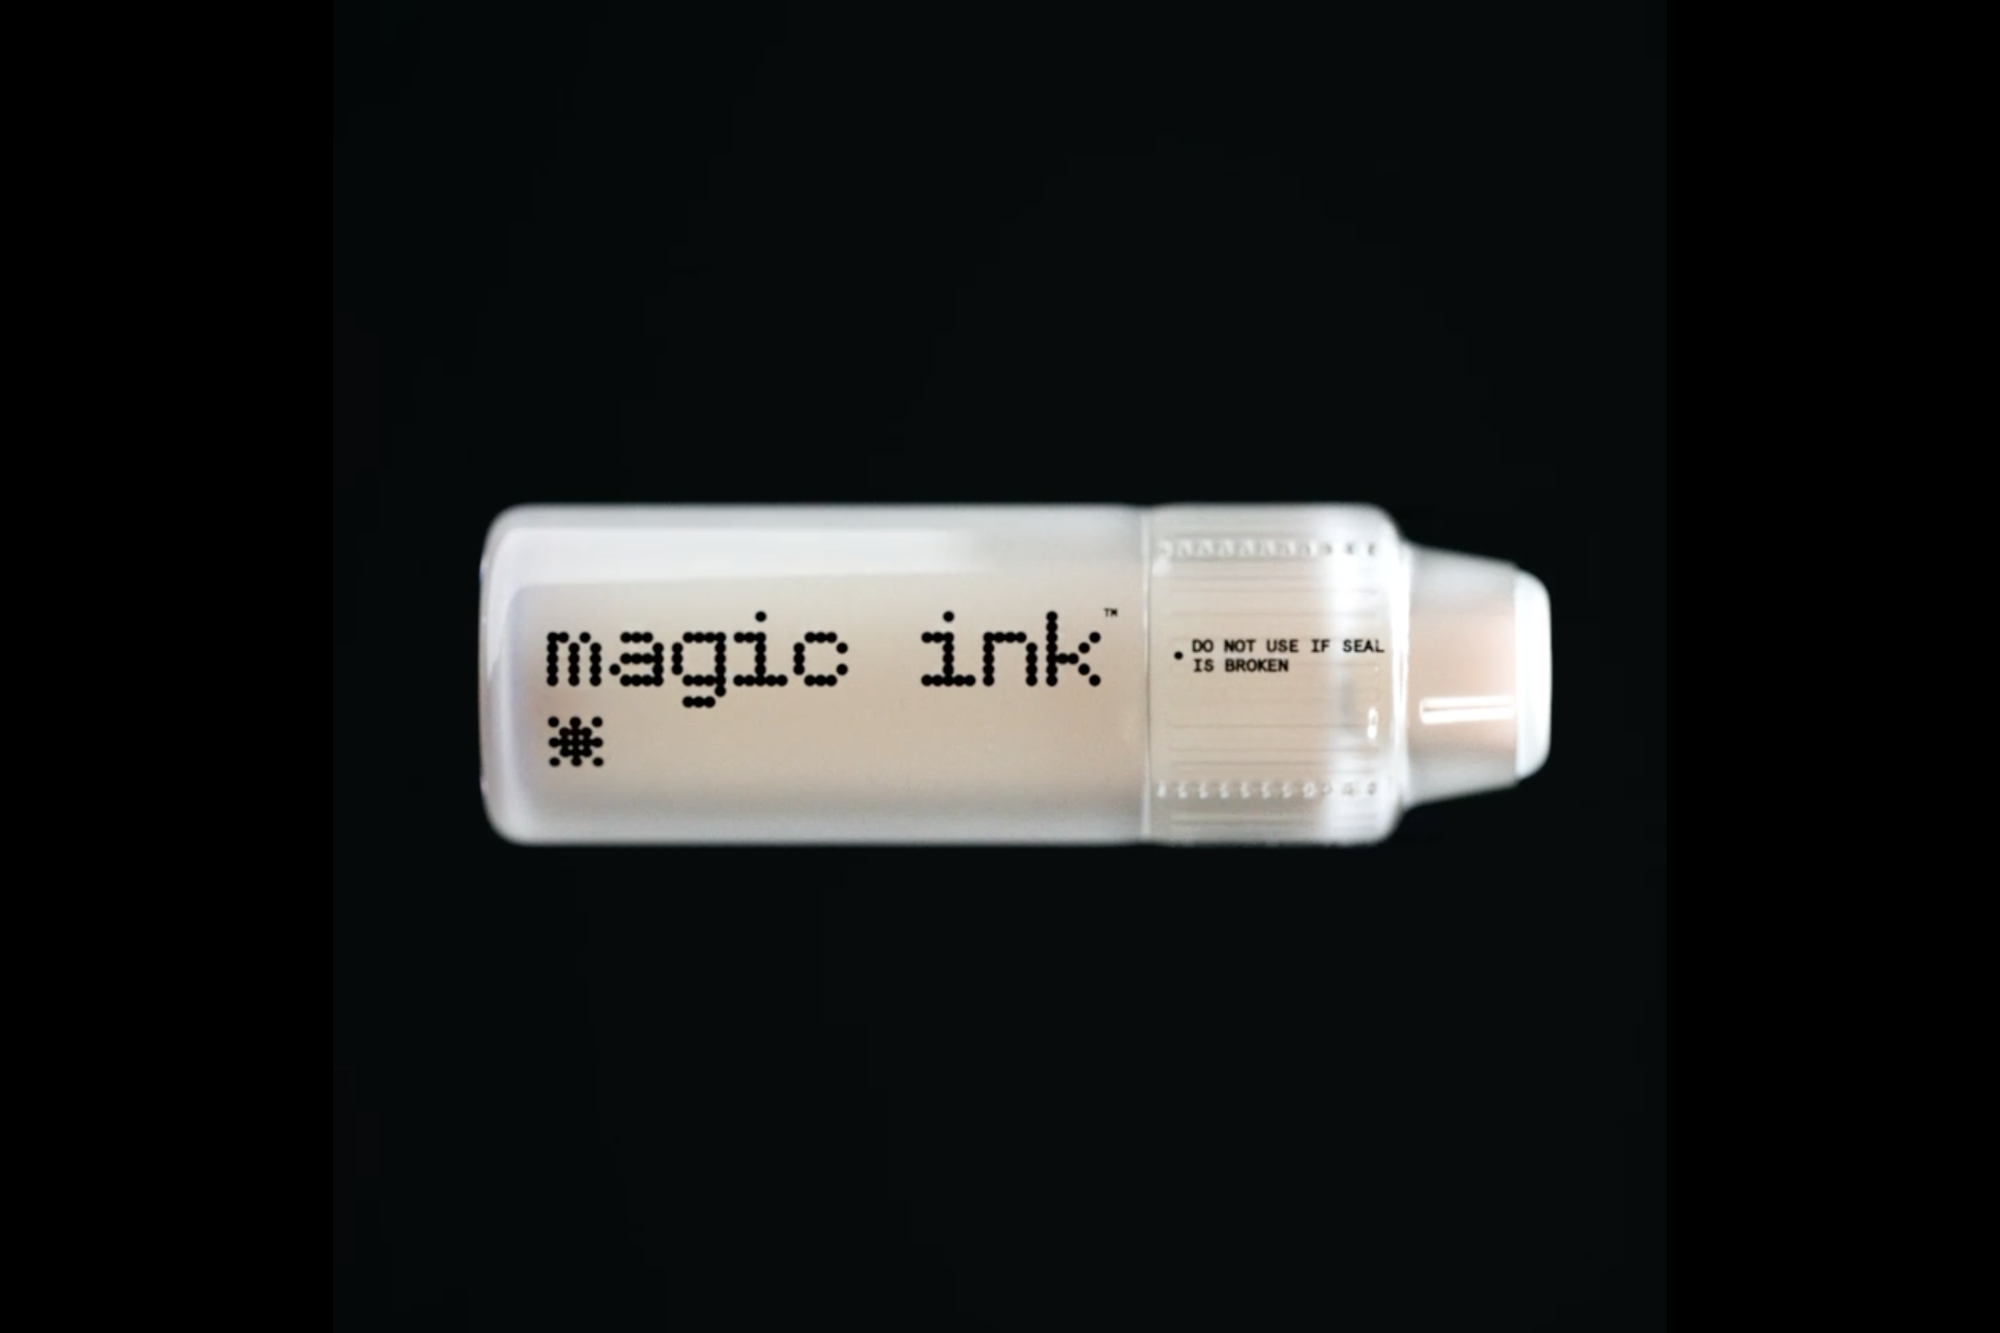 Magic Ink tattoo being rewritten and redesigned